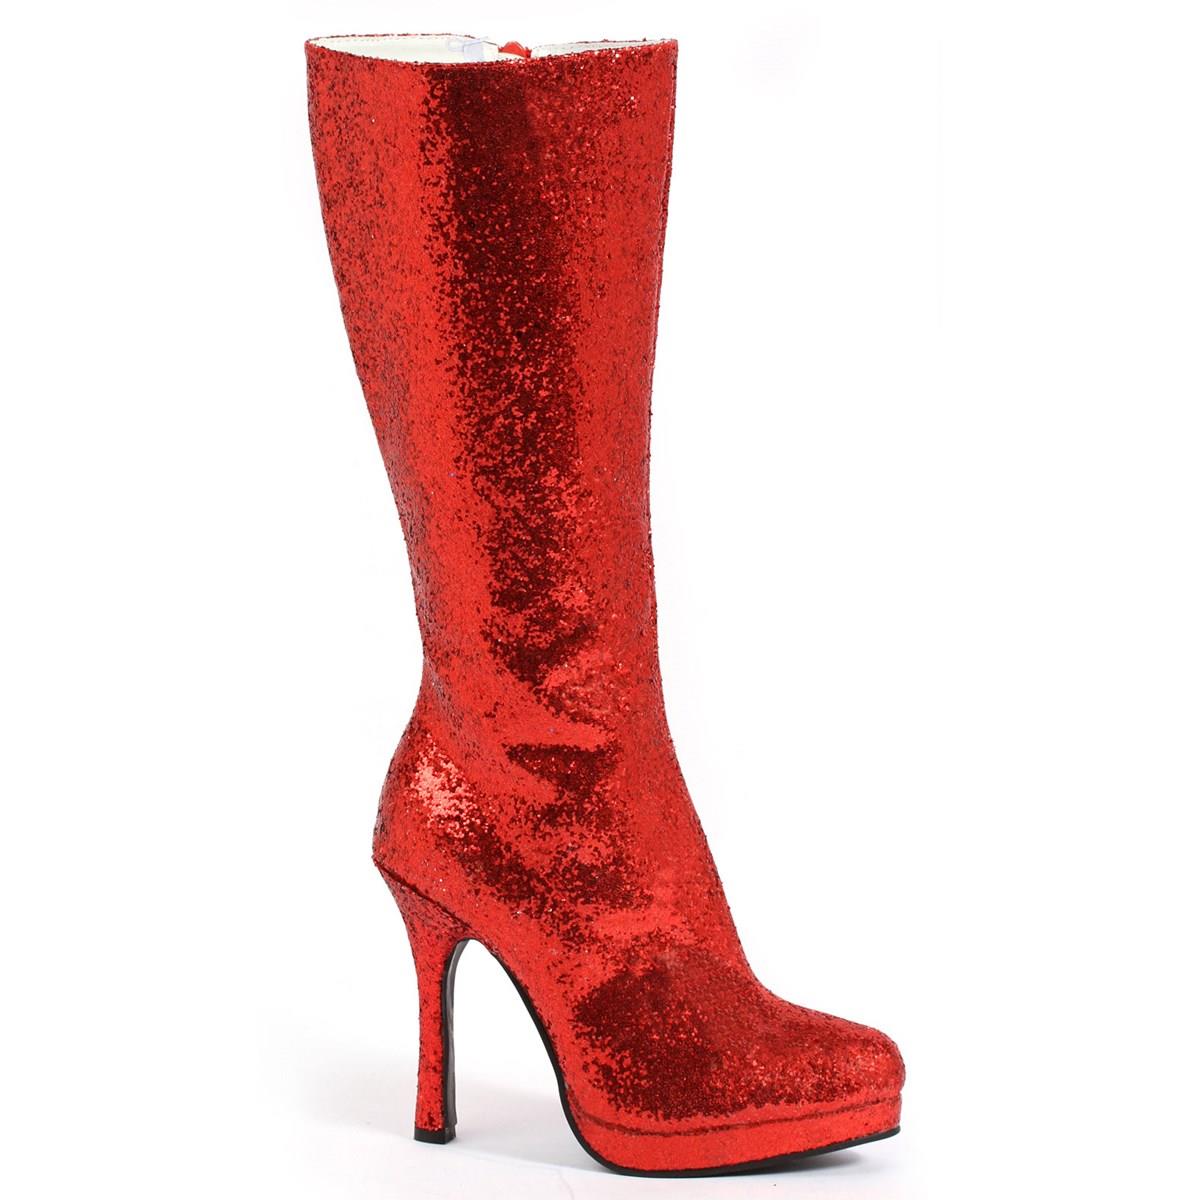 248699 Womens Red Glitter Boots - Size 7